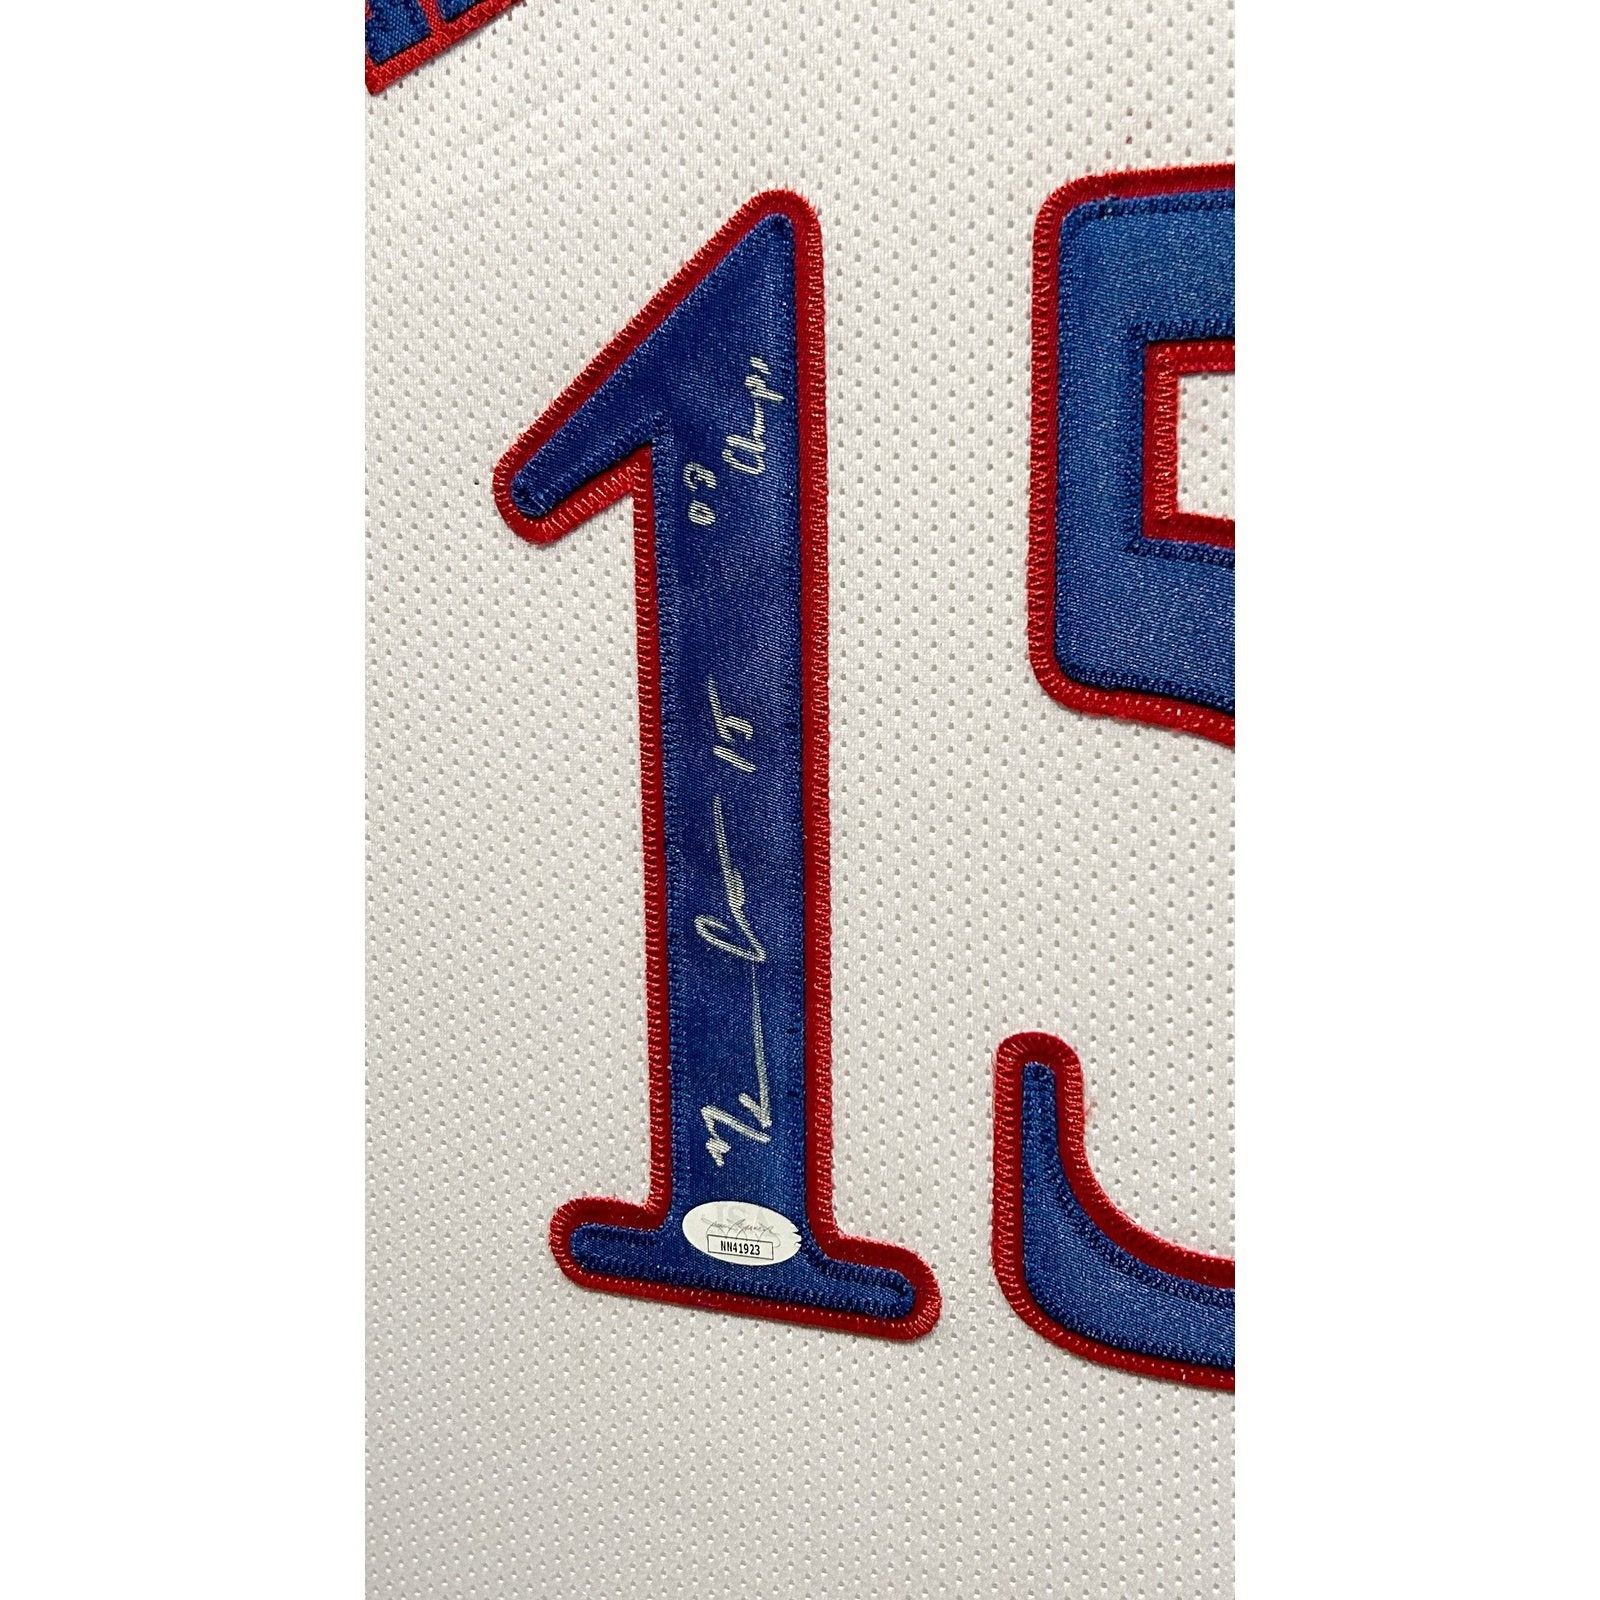 mario chalmers signed jersey